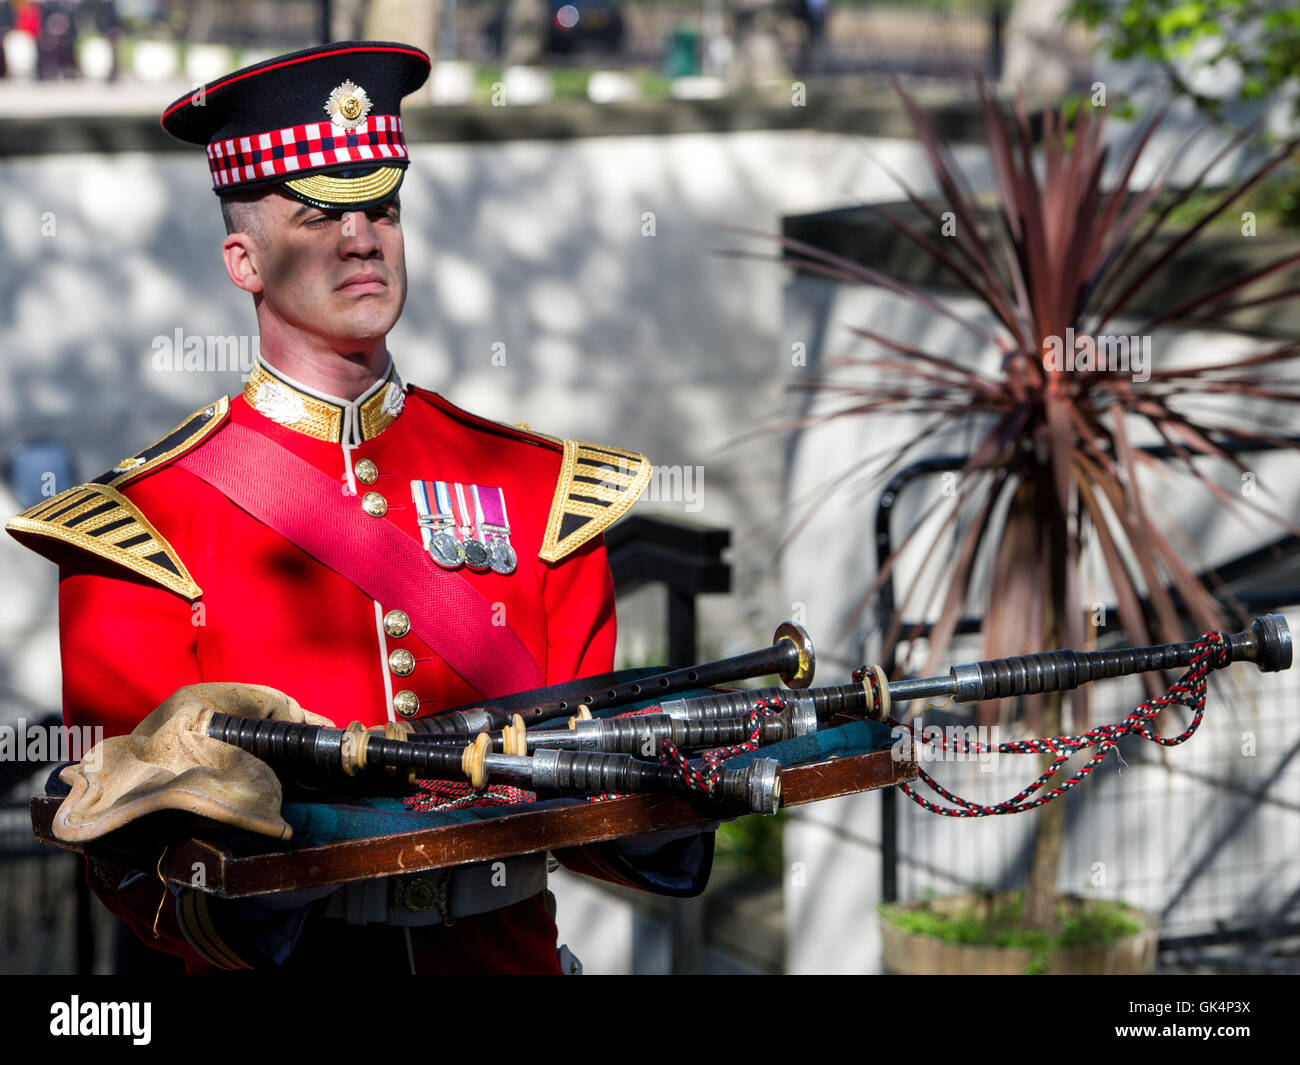 Will Casson-Smith, Warrant Officer, First Class Band Master accompanied by Piper John Mitchell, lay a set of 100-year-old bagpipes belonging to Pipe Major William Lawrie of the Argyll and Sunderland Regiment in the Chapel of Wellington Barracks. Major Law Stock Photo